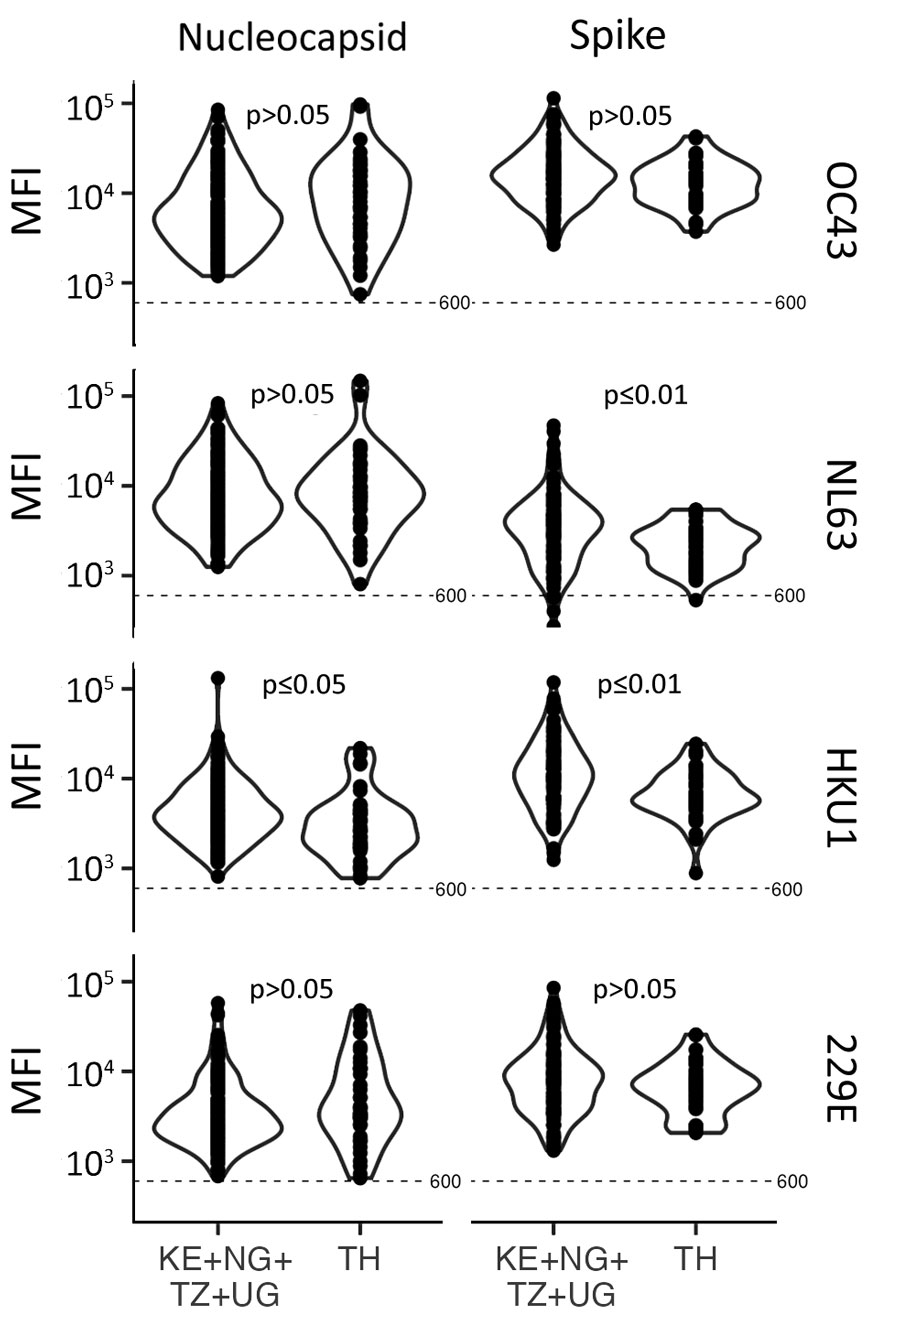 Violin plots of signal-to-noise ratio comparing SARS-CoV-2 IgG responses in serum and plasma samples before COVID-19 pandemic, Thailand and Africa. Dotted line indicates signal-to-noise ratio cutoff. Results show higher SARS-CoV-2 responses in participants from Africa than in participants from Thailand. Significance was determined by Wilcoxon rank-sum test. KE, Kenya; N, nucleocapsid; NG, Nigeria; RBD, receptor-binding domain; S1, subunit 1; S2, subunit 2; TH, Thailand; TZ, Tanzania; UG, Uganda.